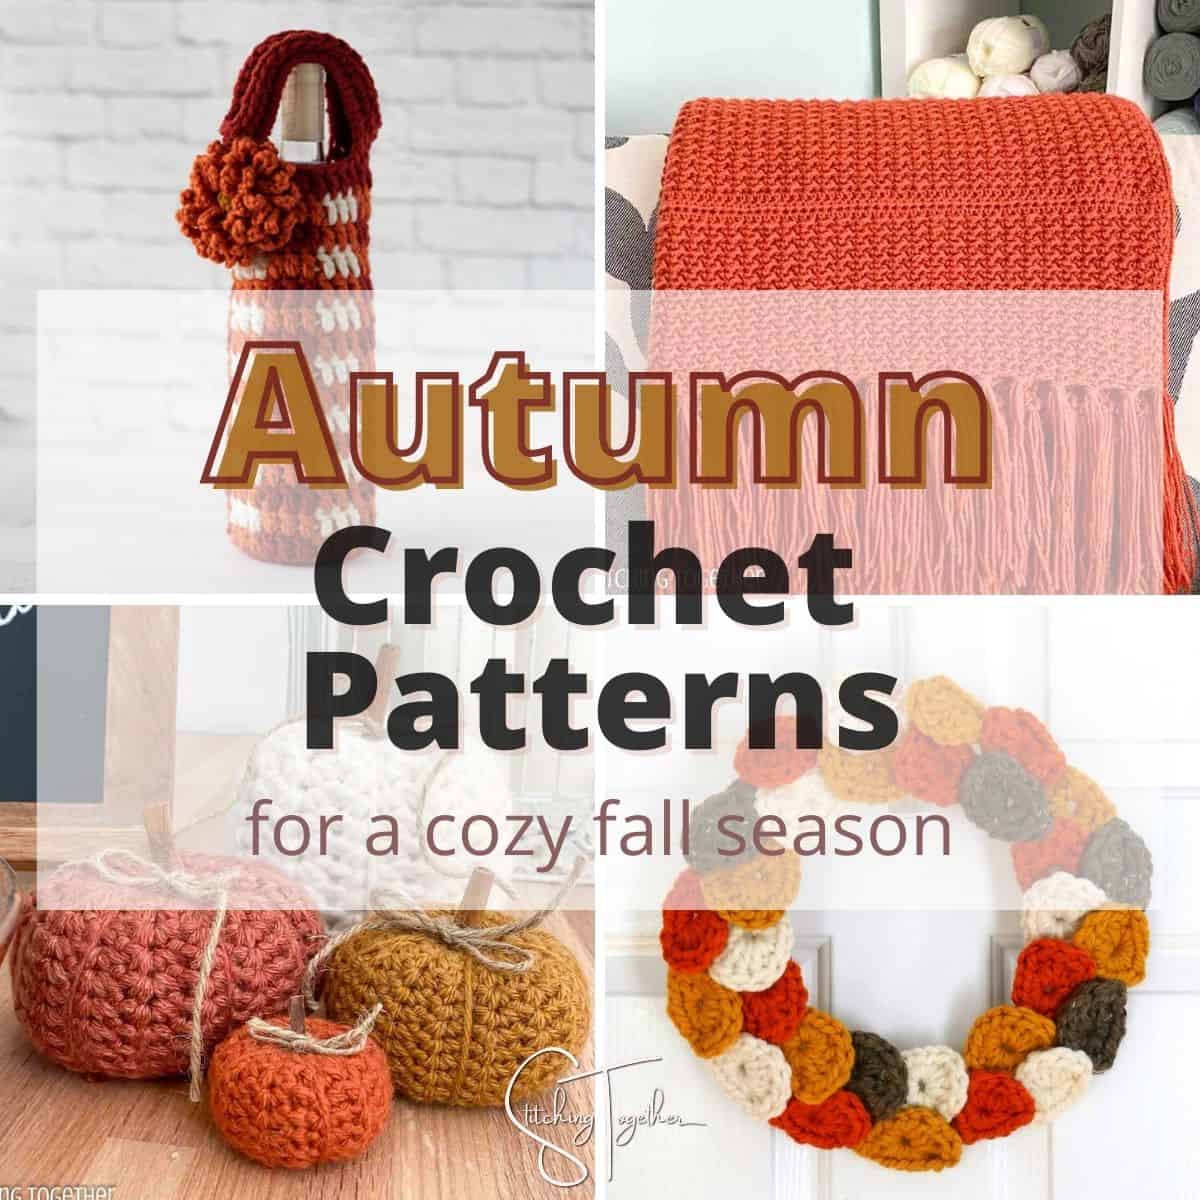 graphic reading "Autumn crochet patterns for a cozy fall" with images